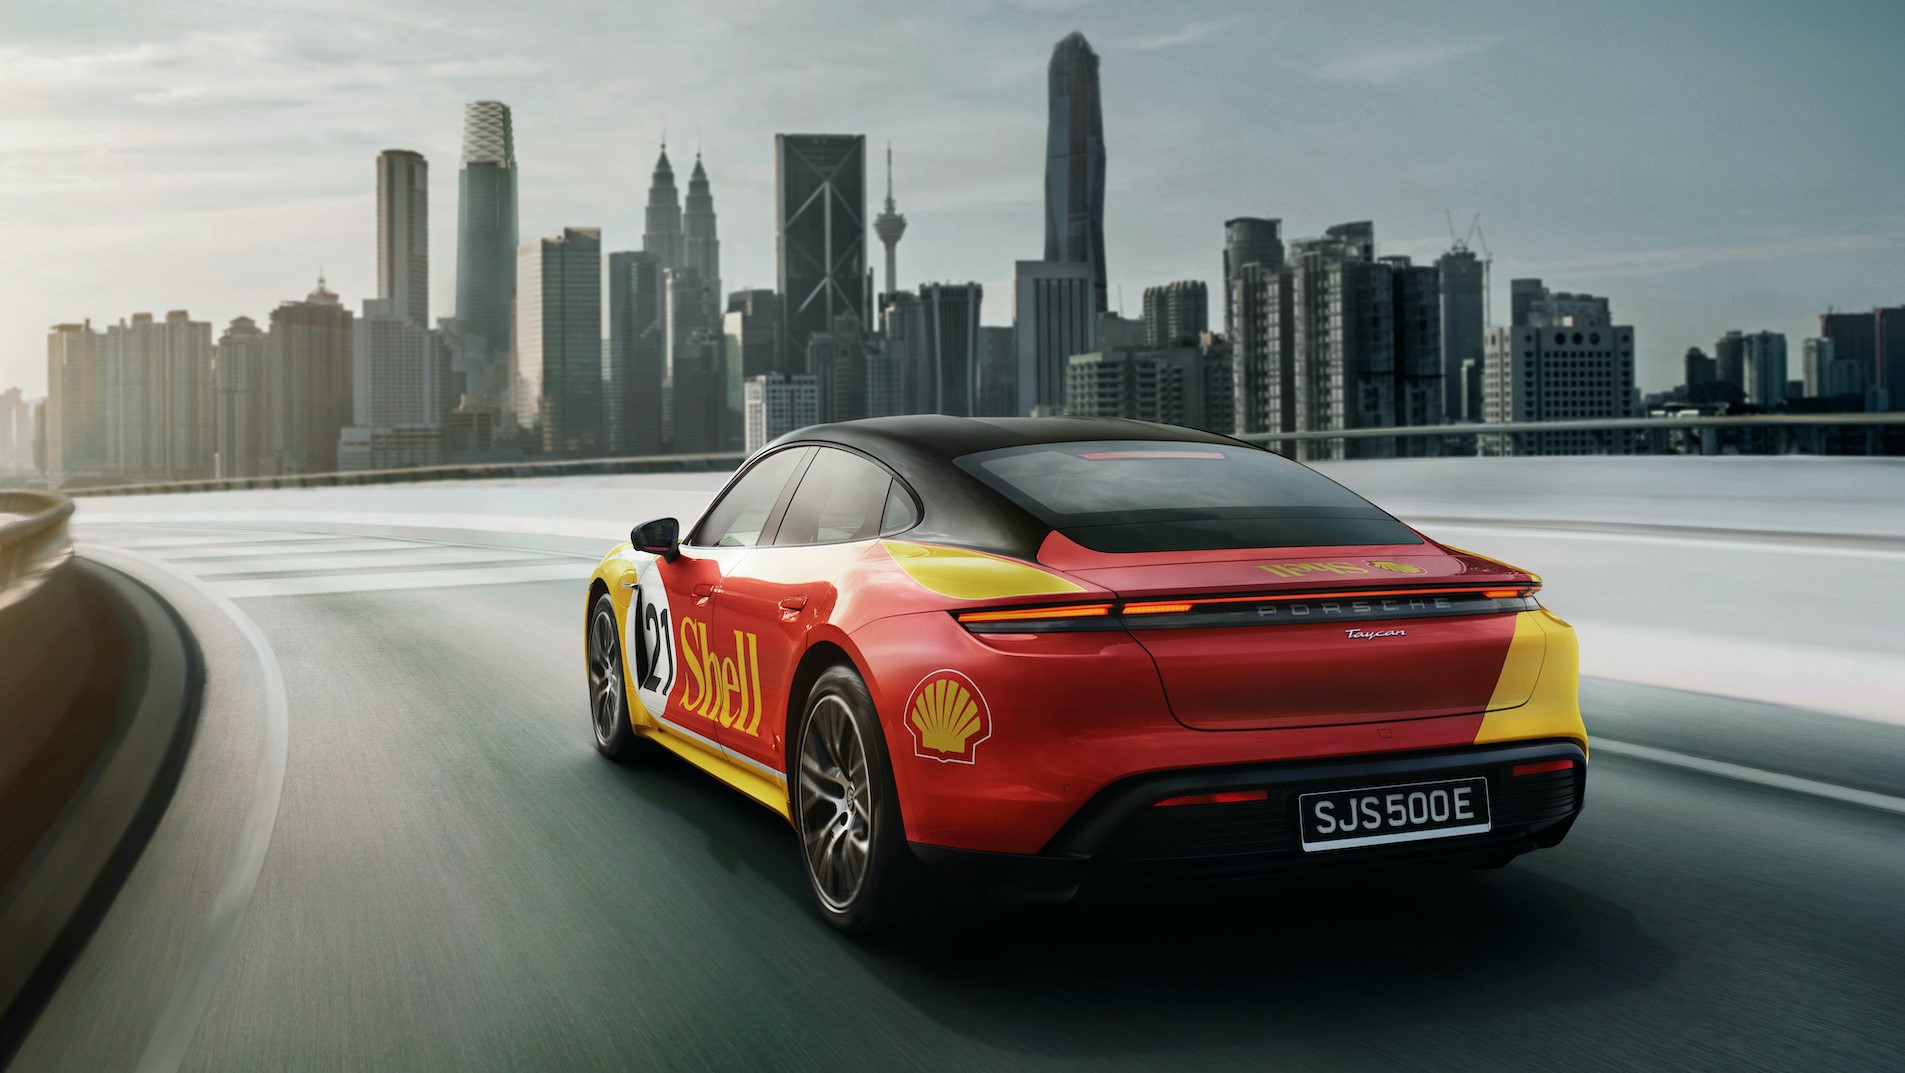 You will soon be able to drive a Porsche Taycan from Singapore to Penang